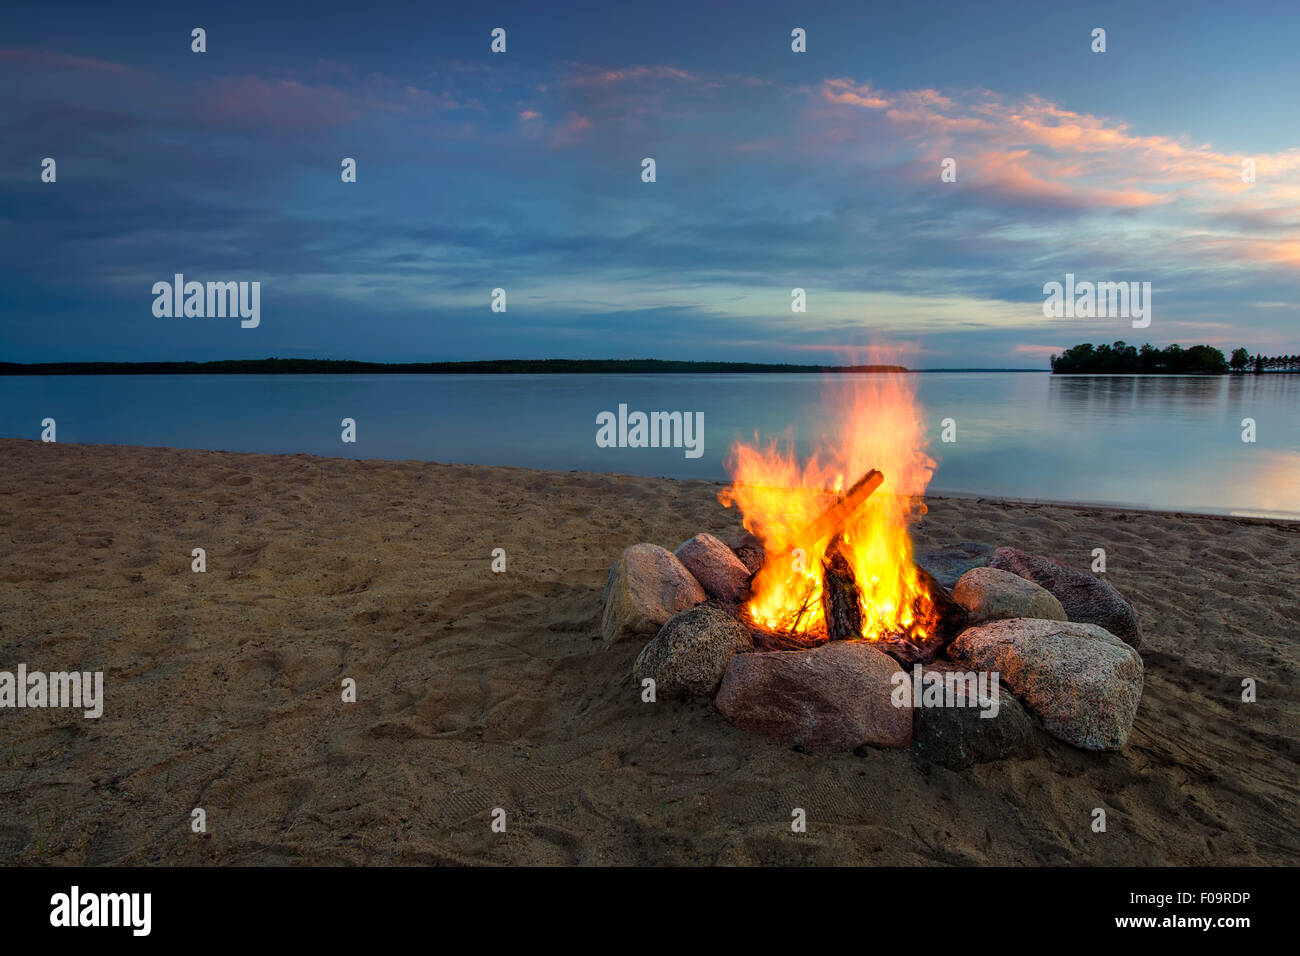 Camp fire on sandy beach, beside lake at sunset. Stock Photo